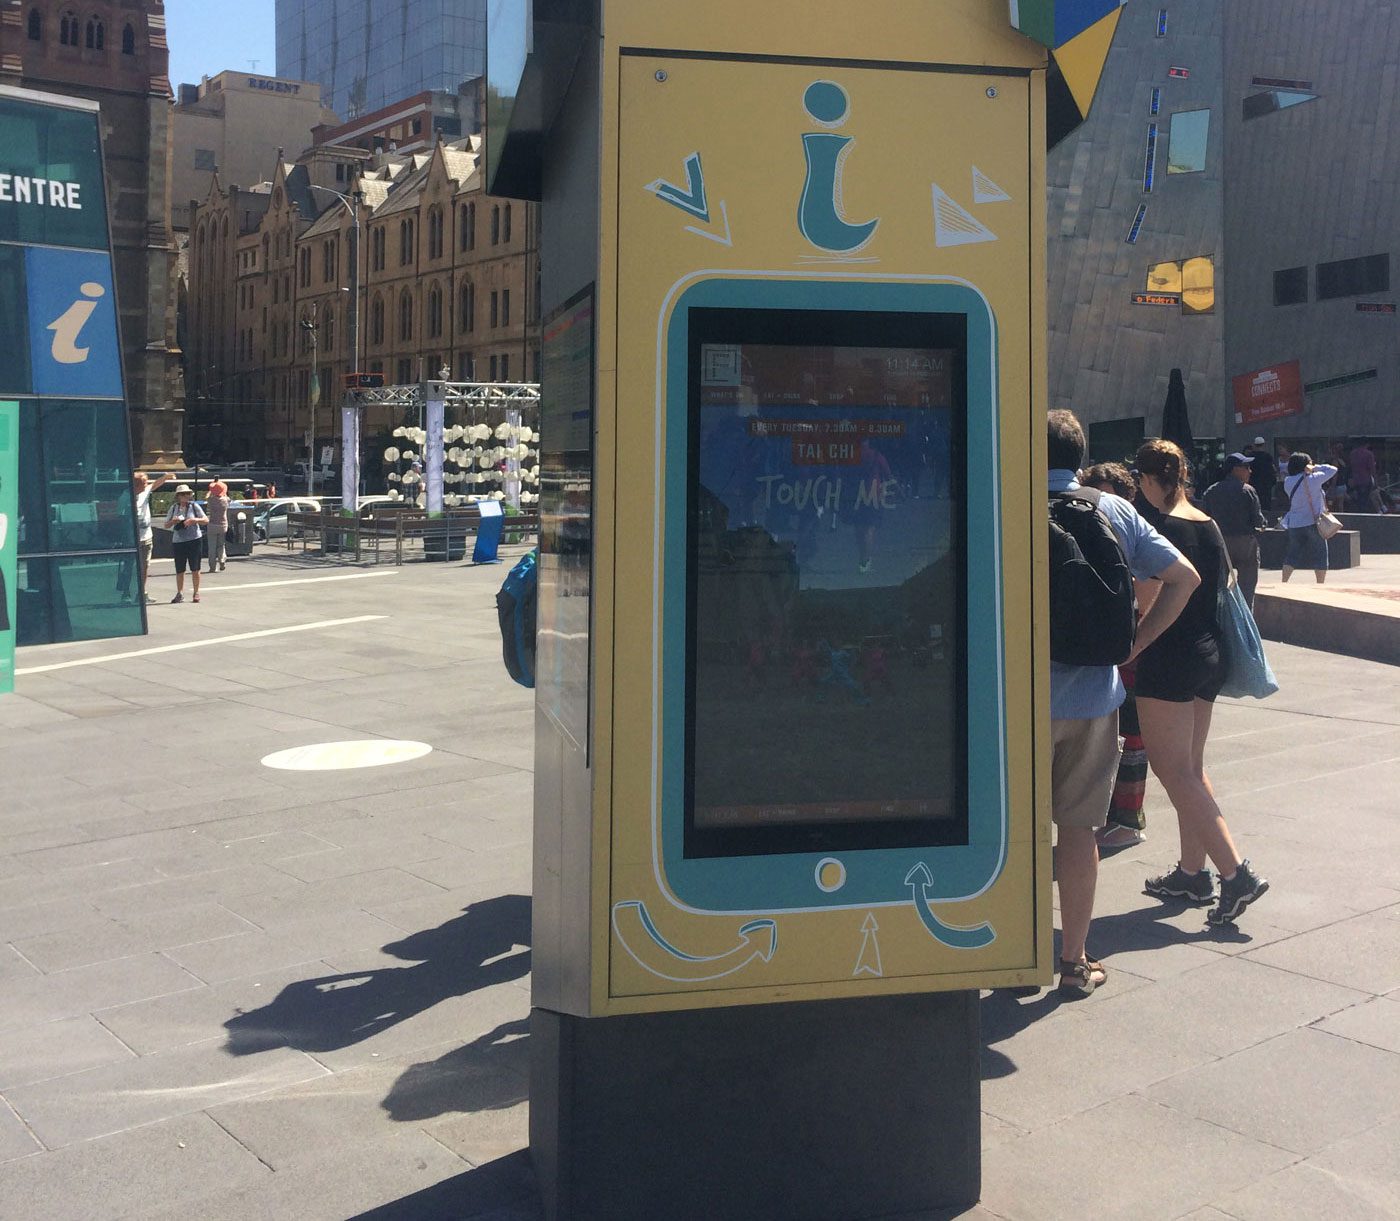 Metrospec Touch Screen Outdoor LCD Displays (Kiosk/Bollard) being used in Melbourne's Federation Square